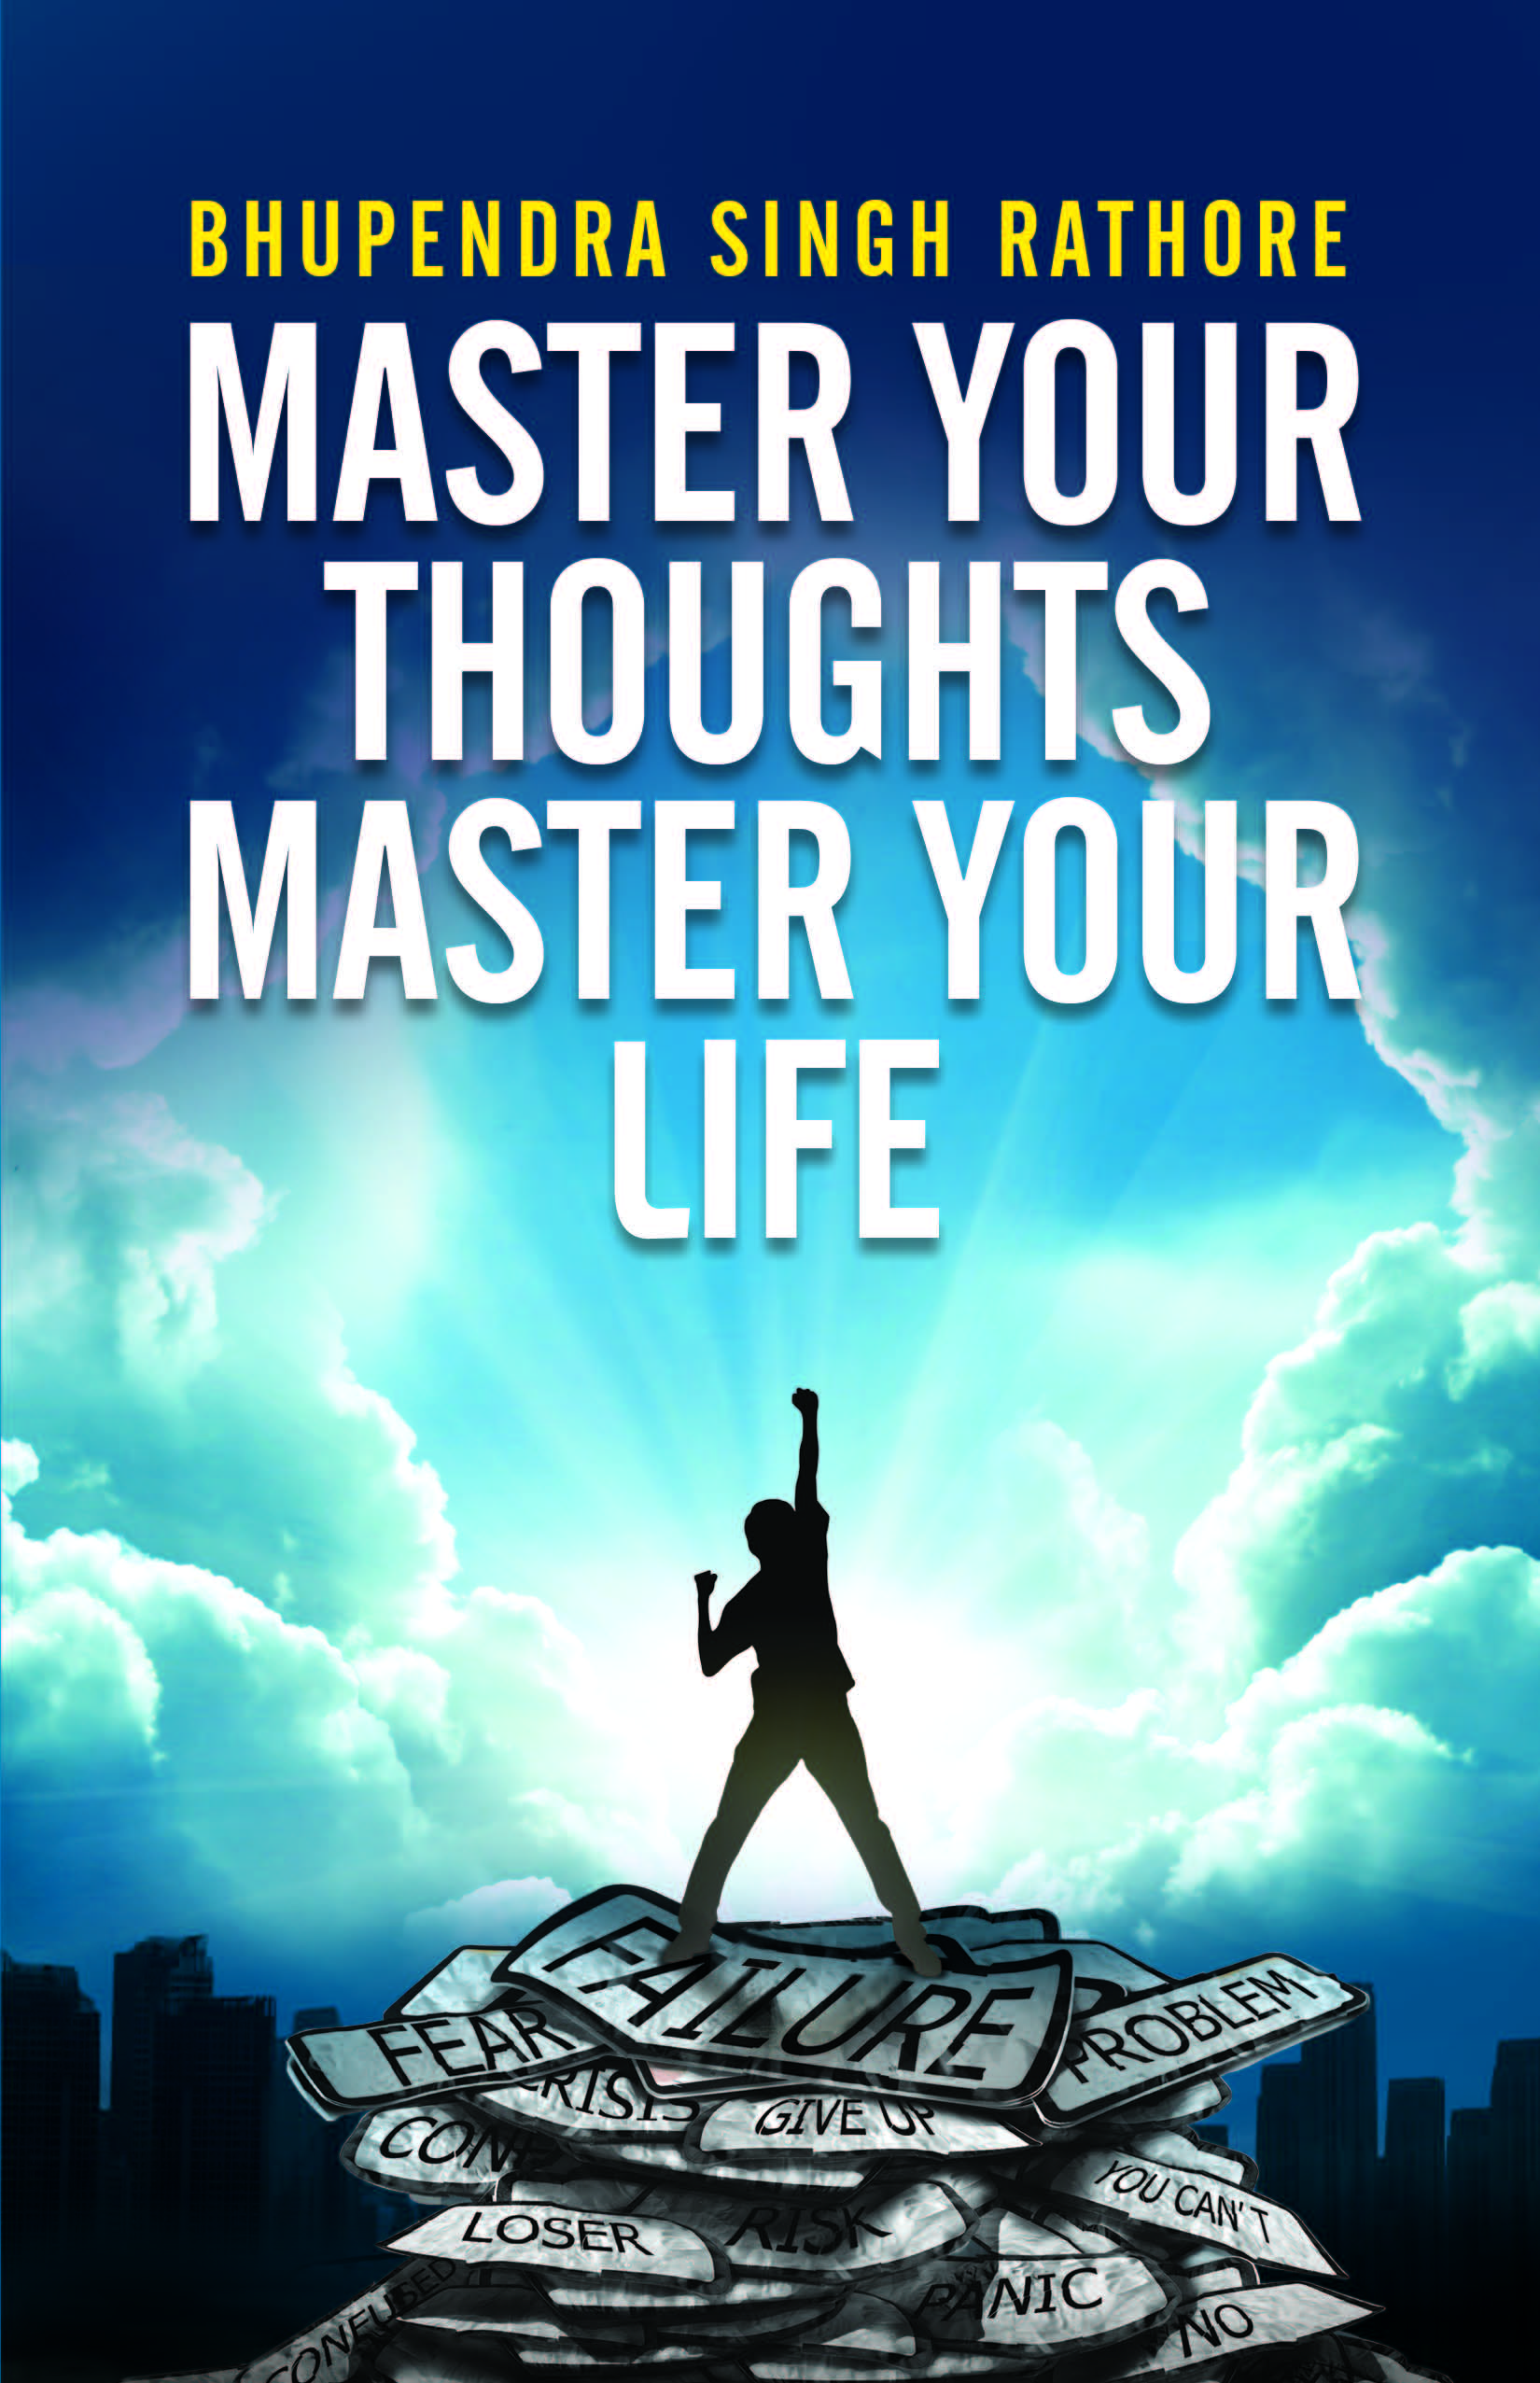 MASTER YOUR THOUGHTS MASTER YOUR LIFE